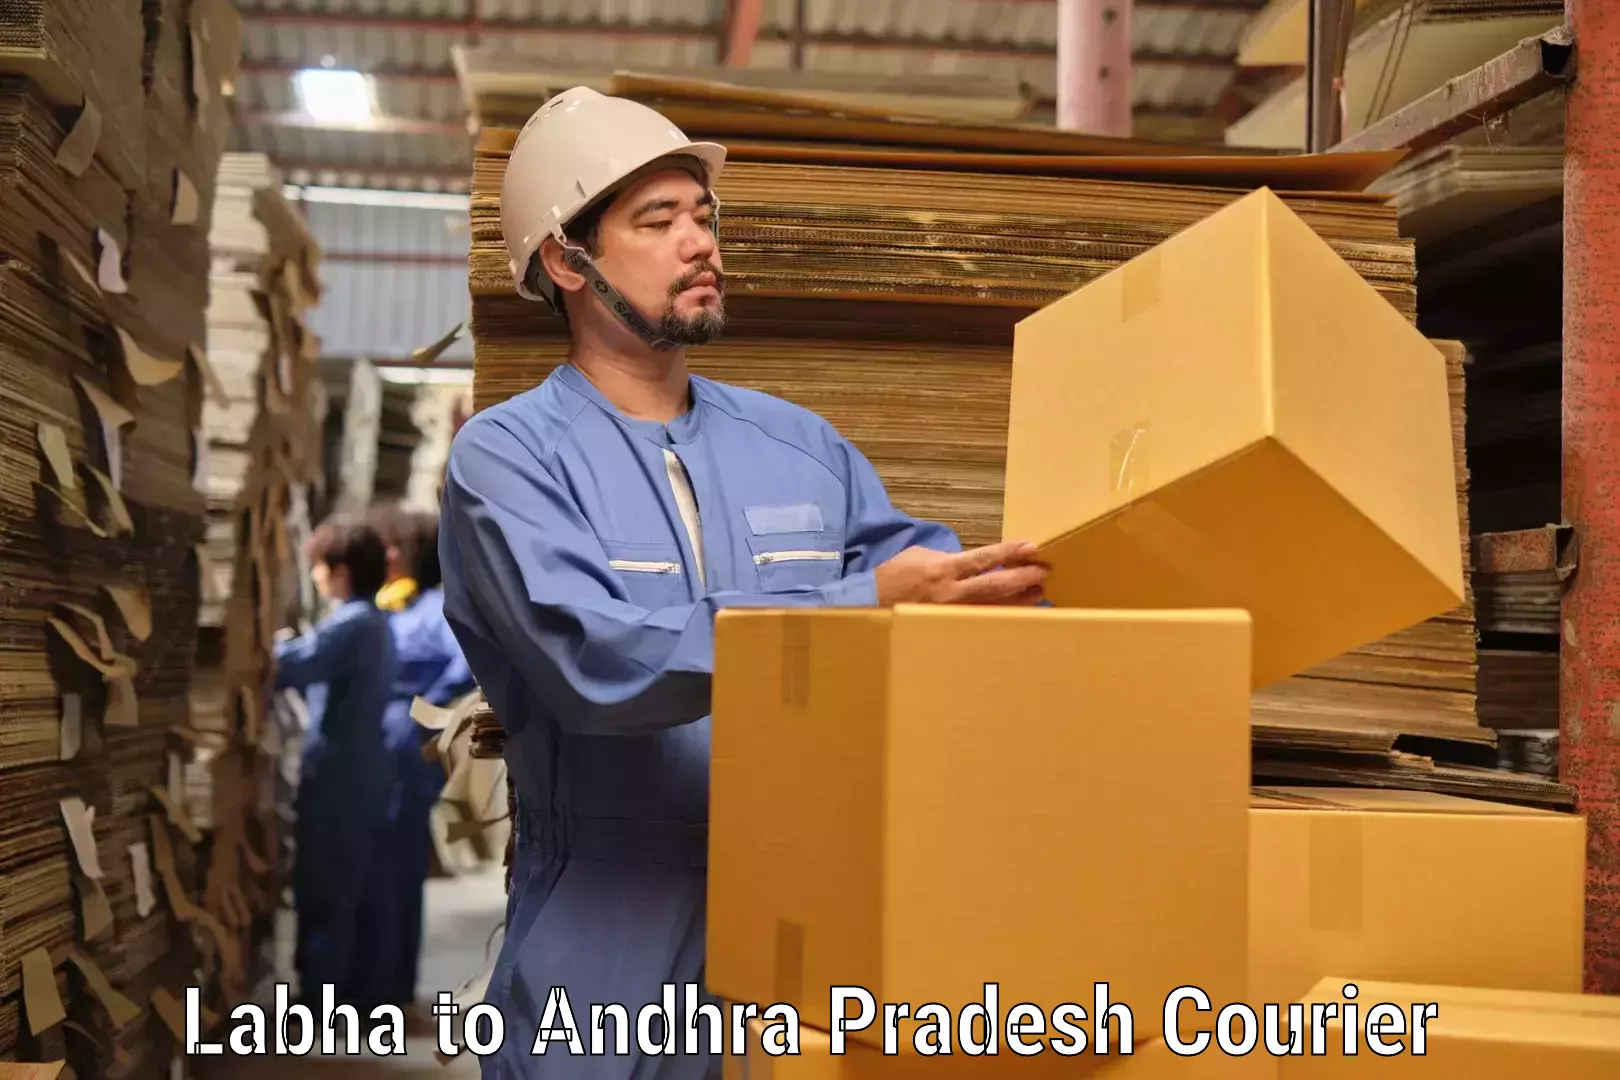 Professional courier handling Labha to Tenali